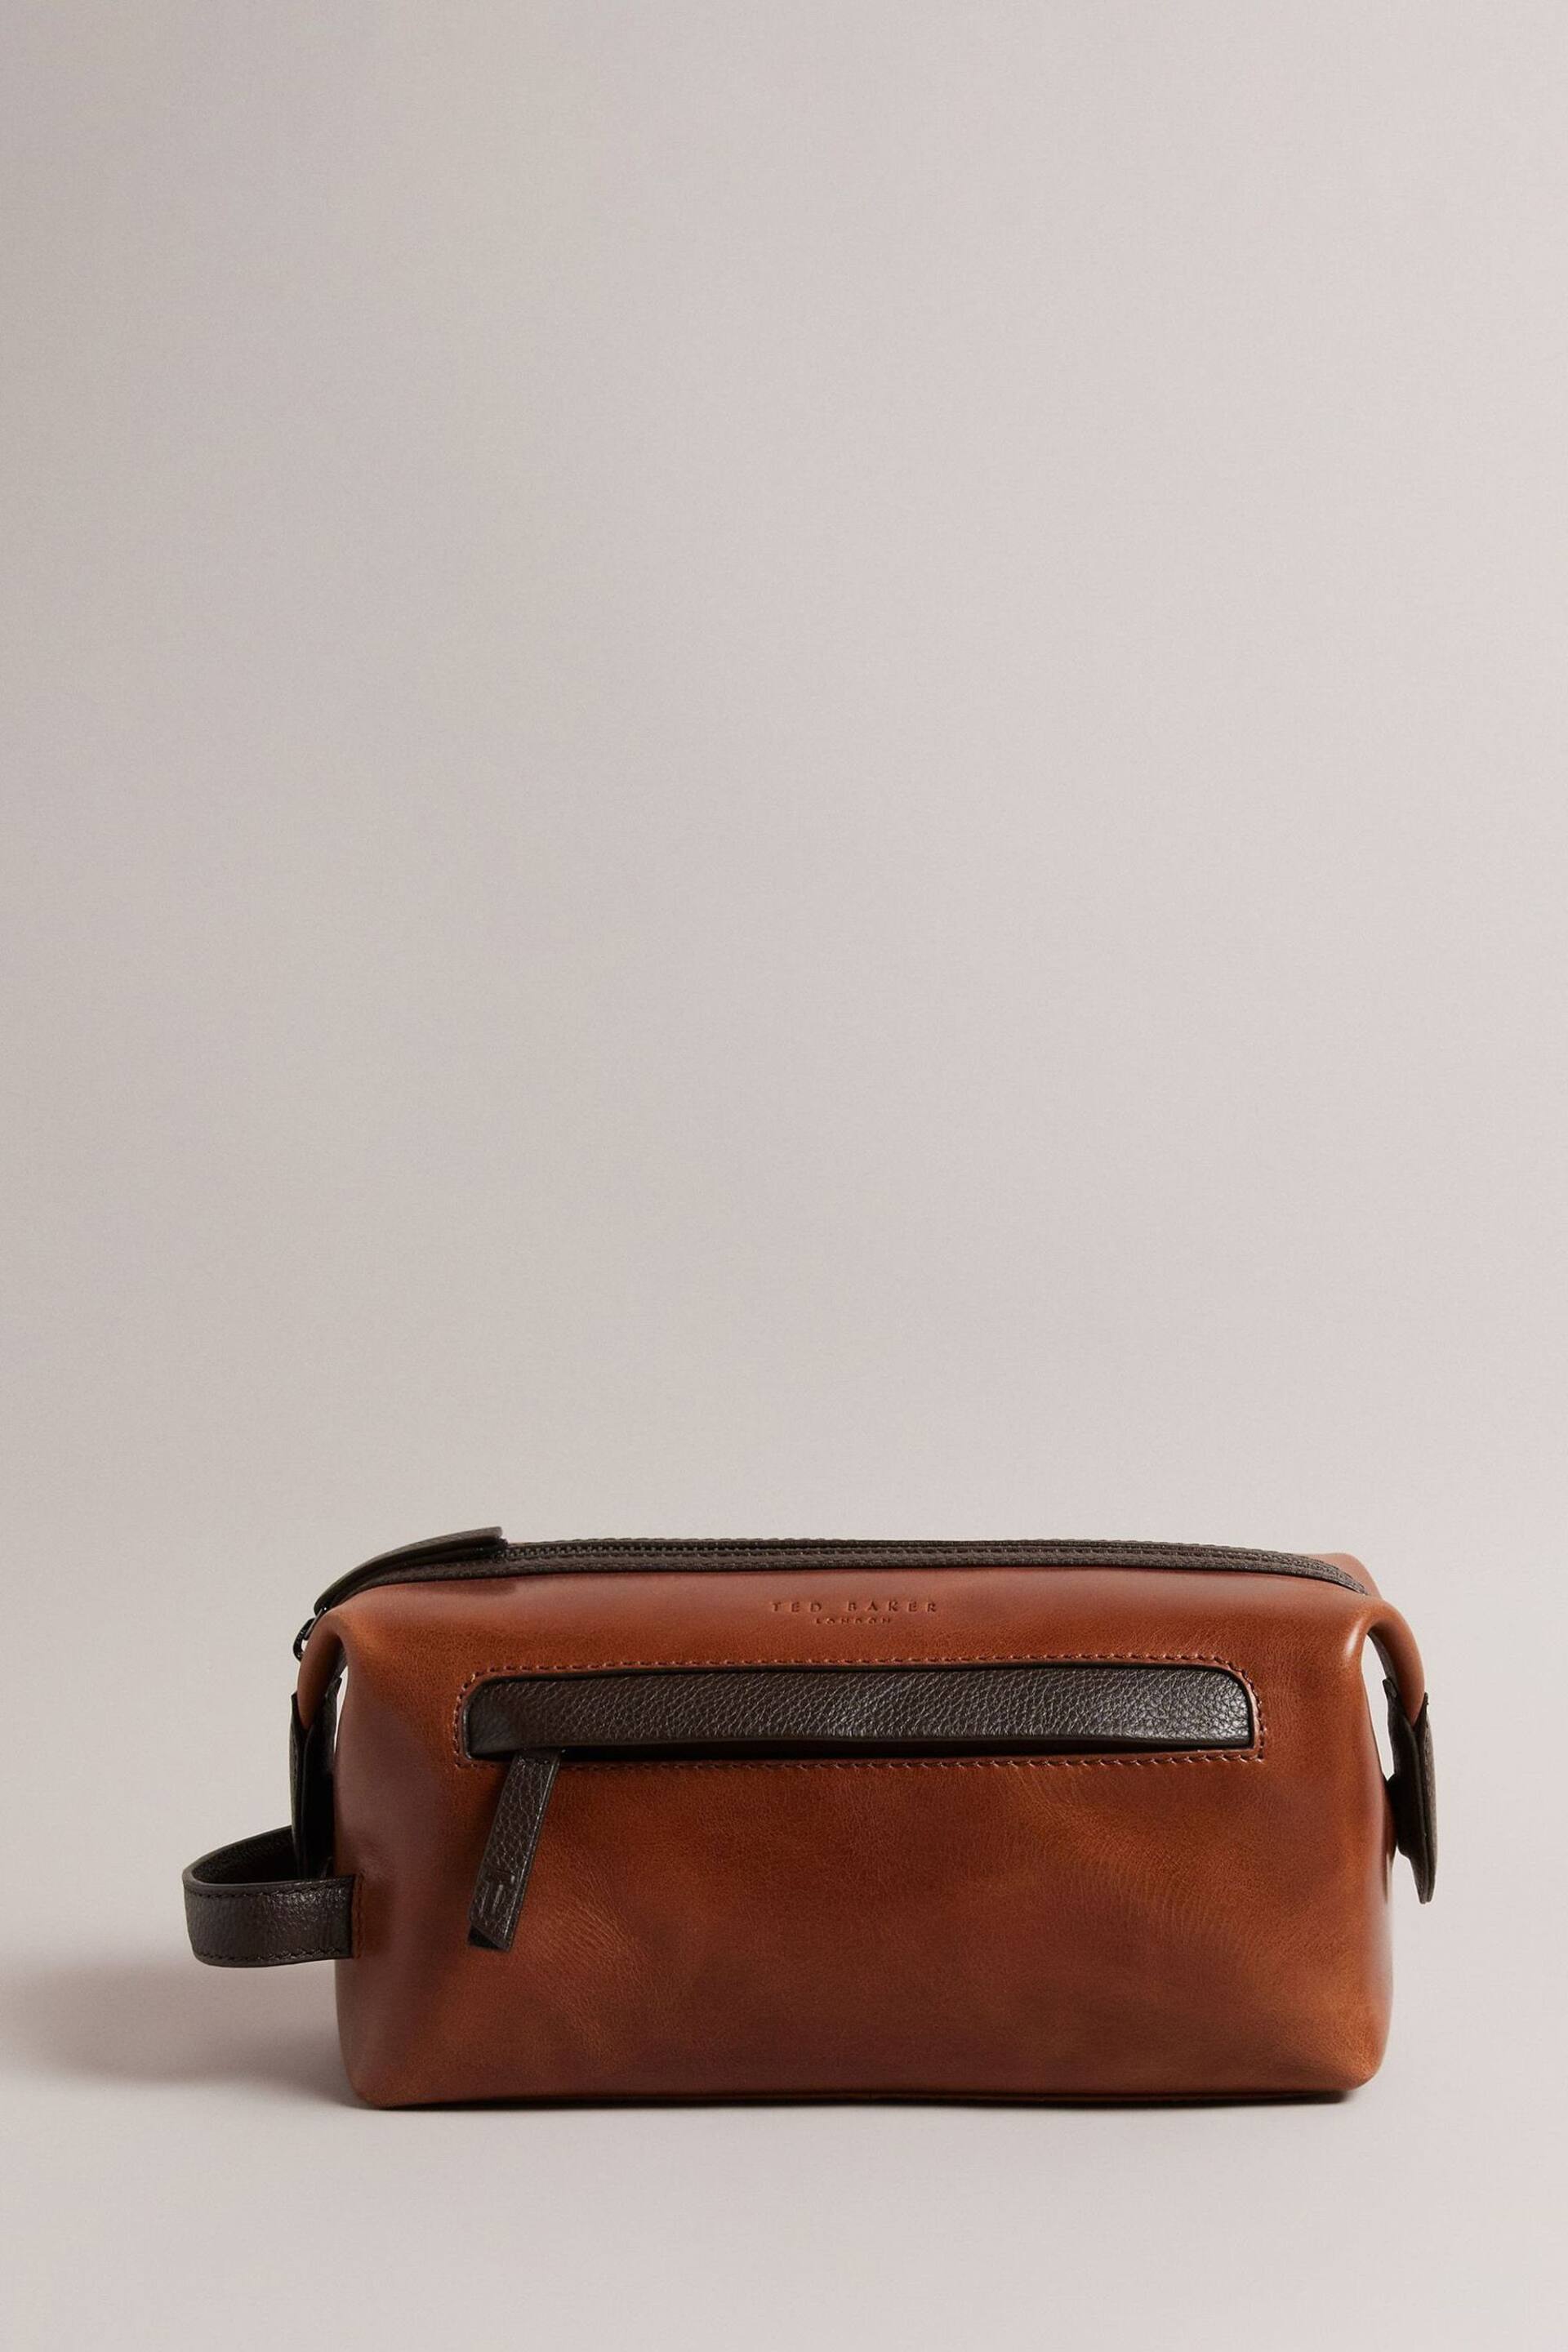 Ted Baker Brown Waxy Leather Washbag - Image 1 of 4